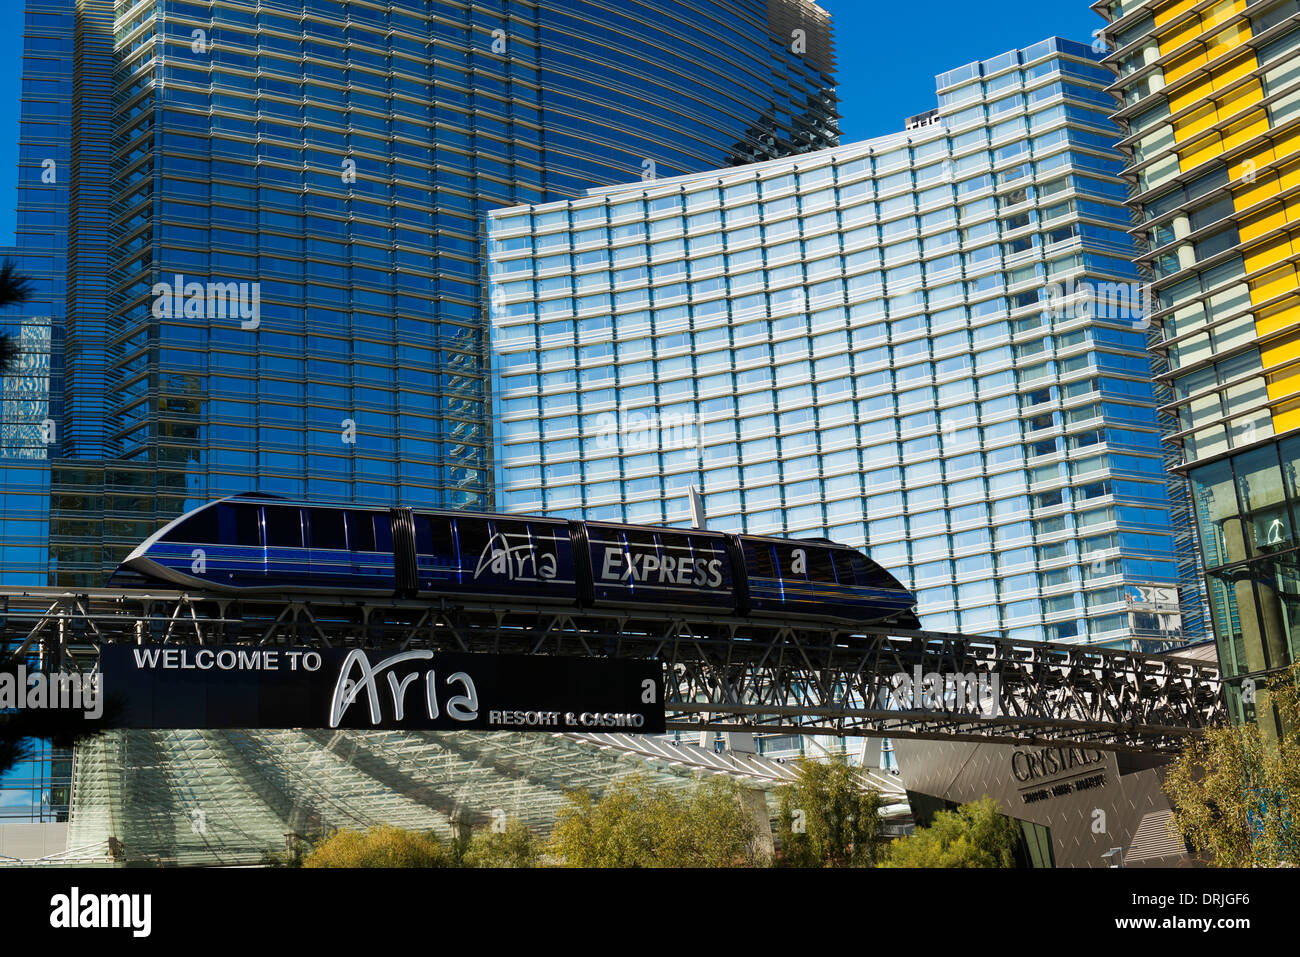 Monorail operating in front of the Aria resort. Stock Photo